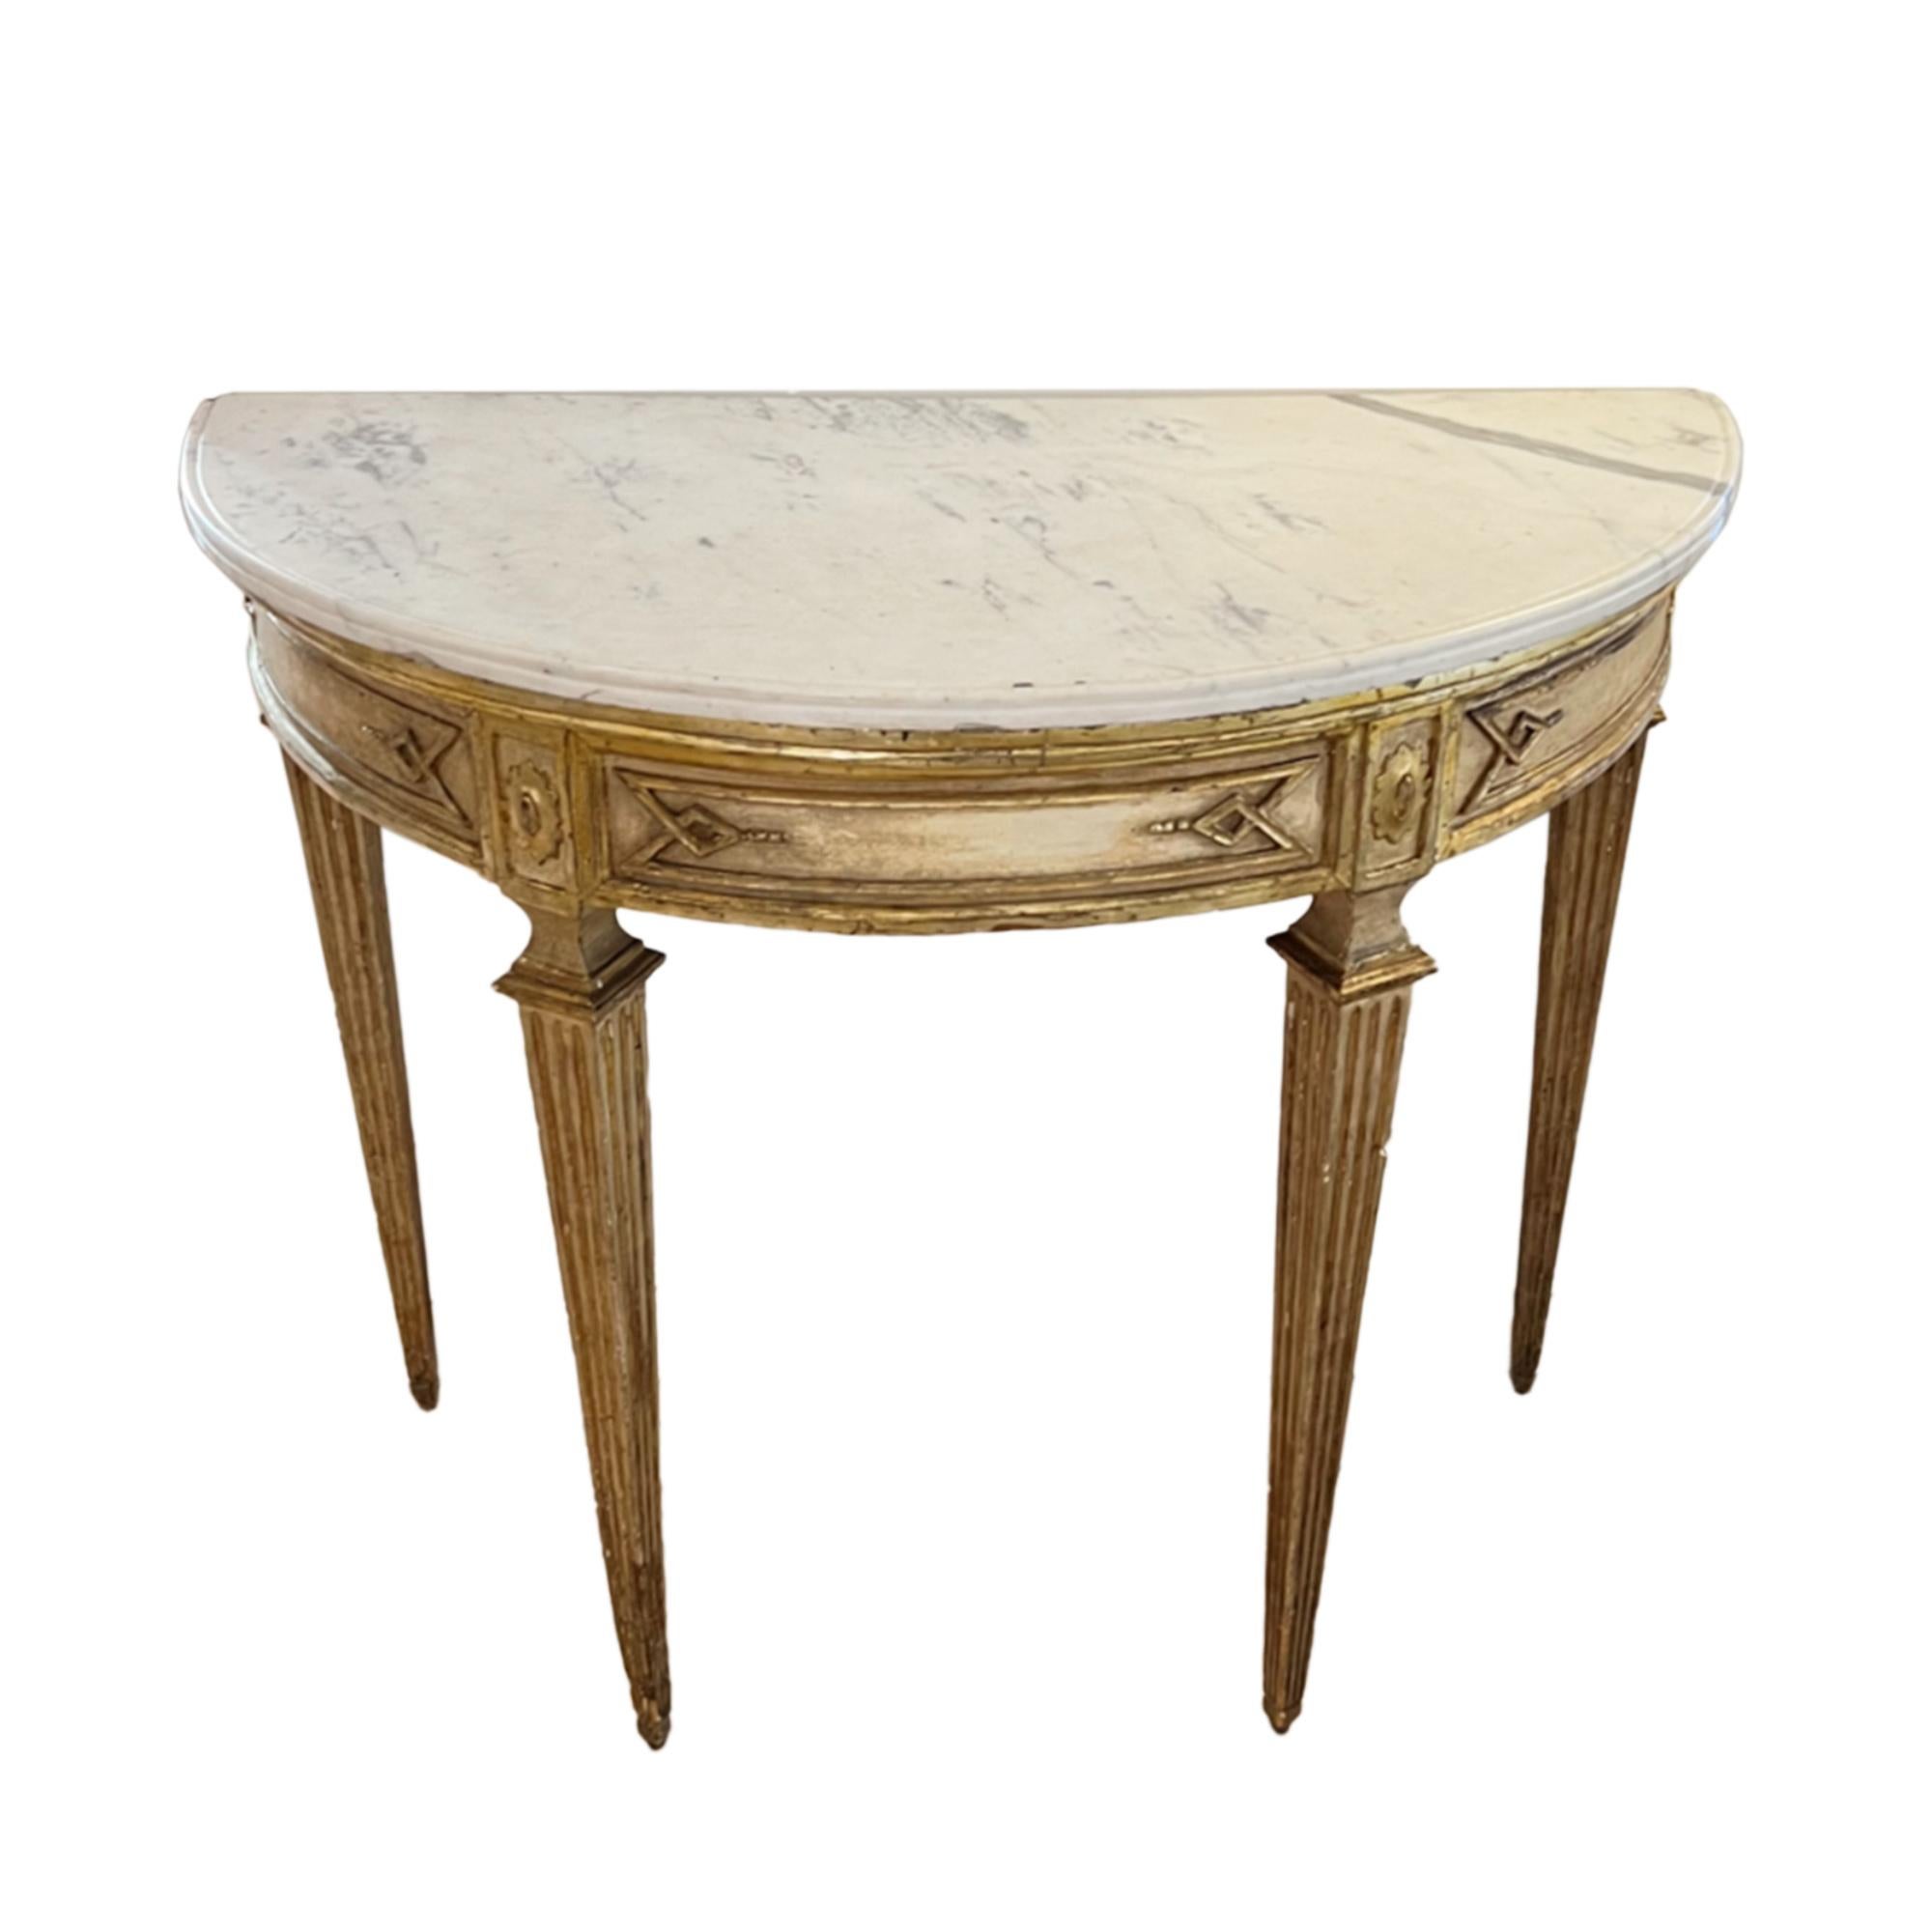 This is a beautiful giltwood console table made in Italy in the early part of the 19th century. Please take a look at our pictures to see all the carved details and the lovely marble top. 

An elegant design with tapering legs and decorative